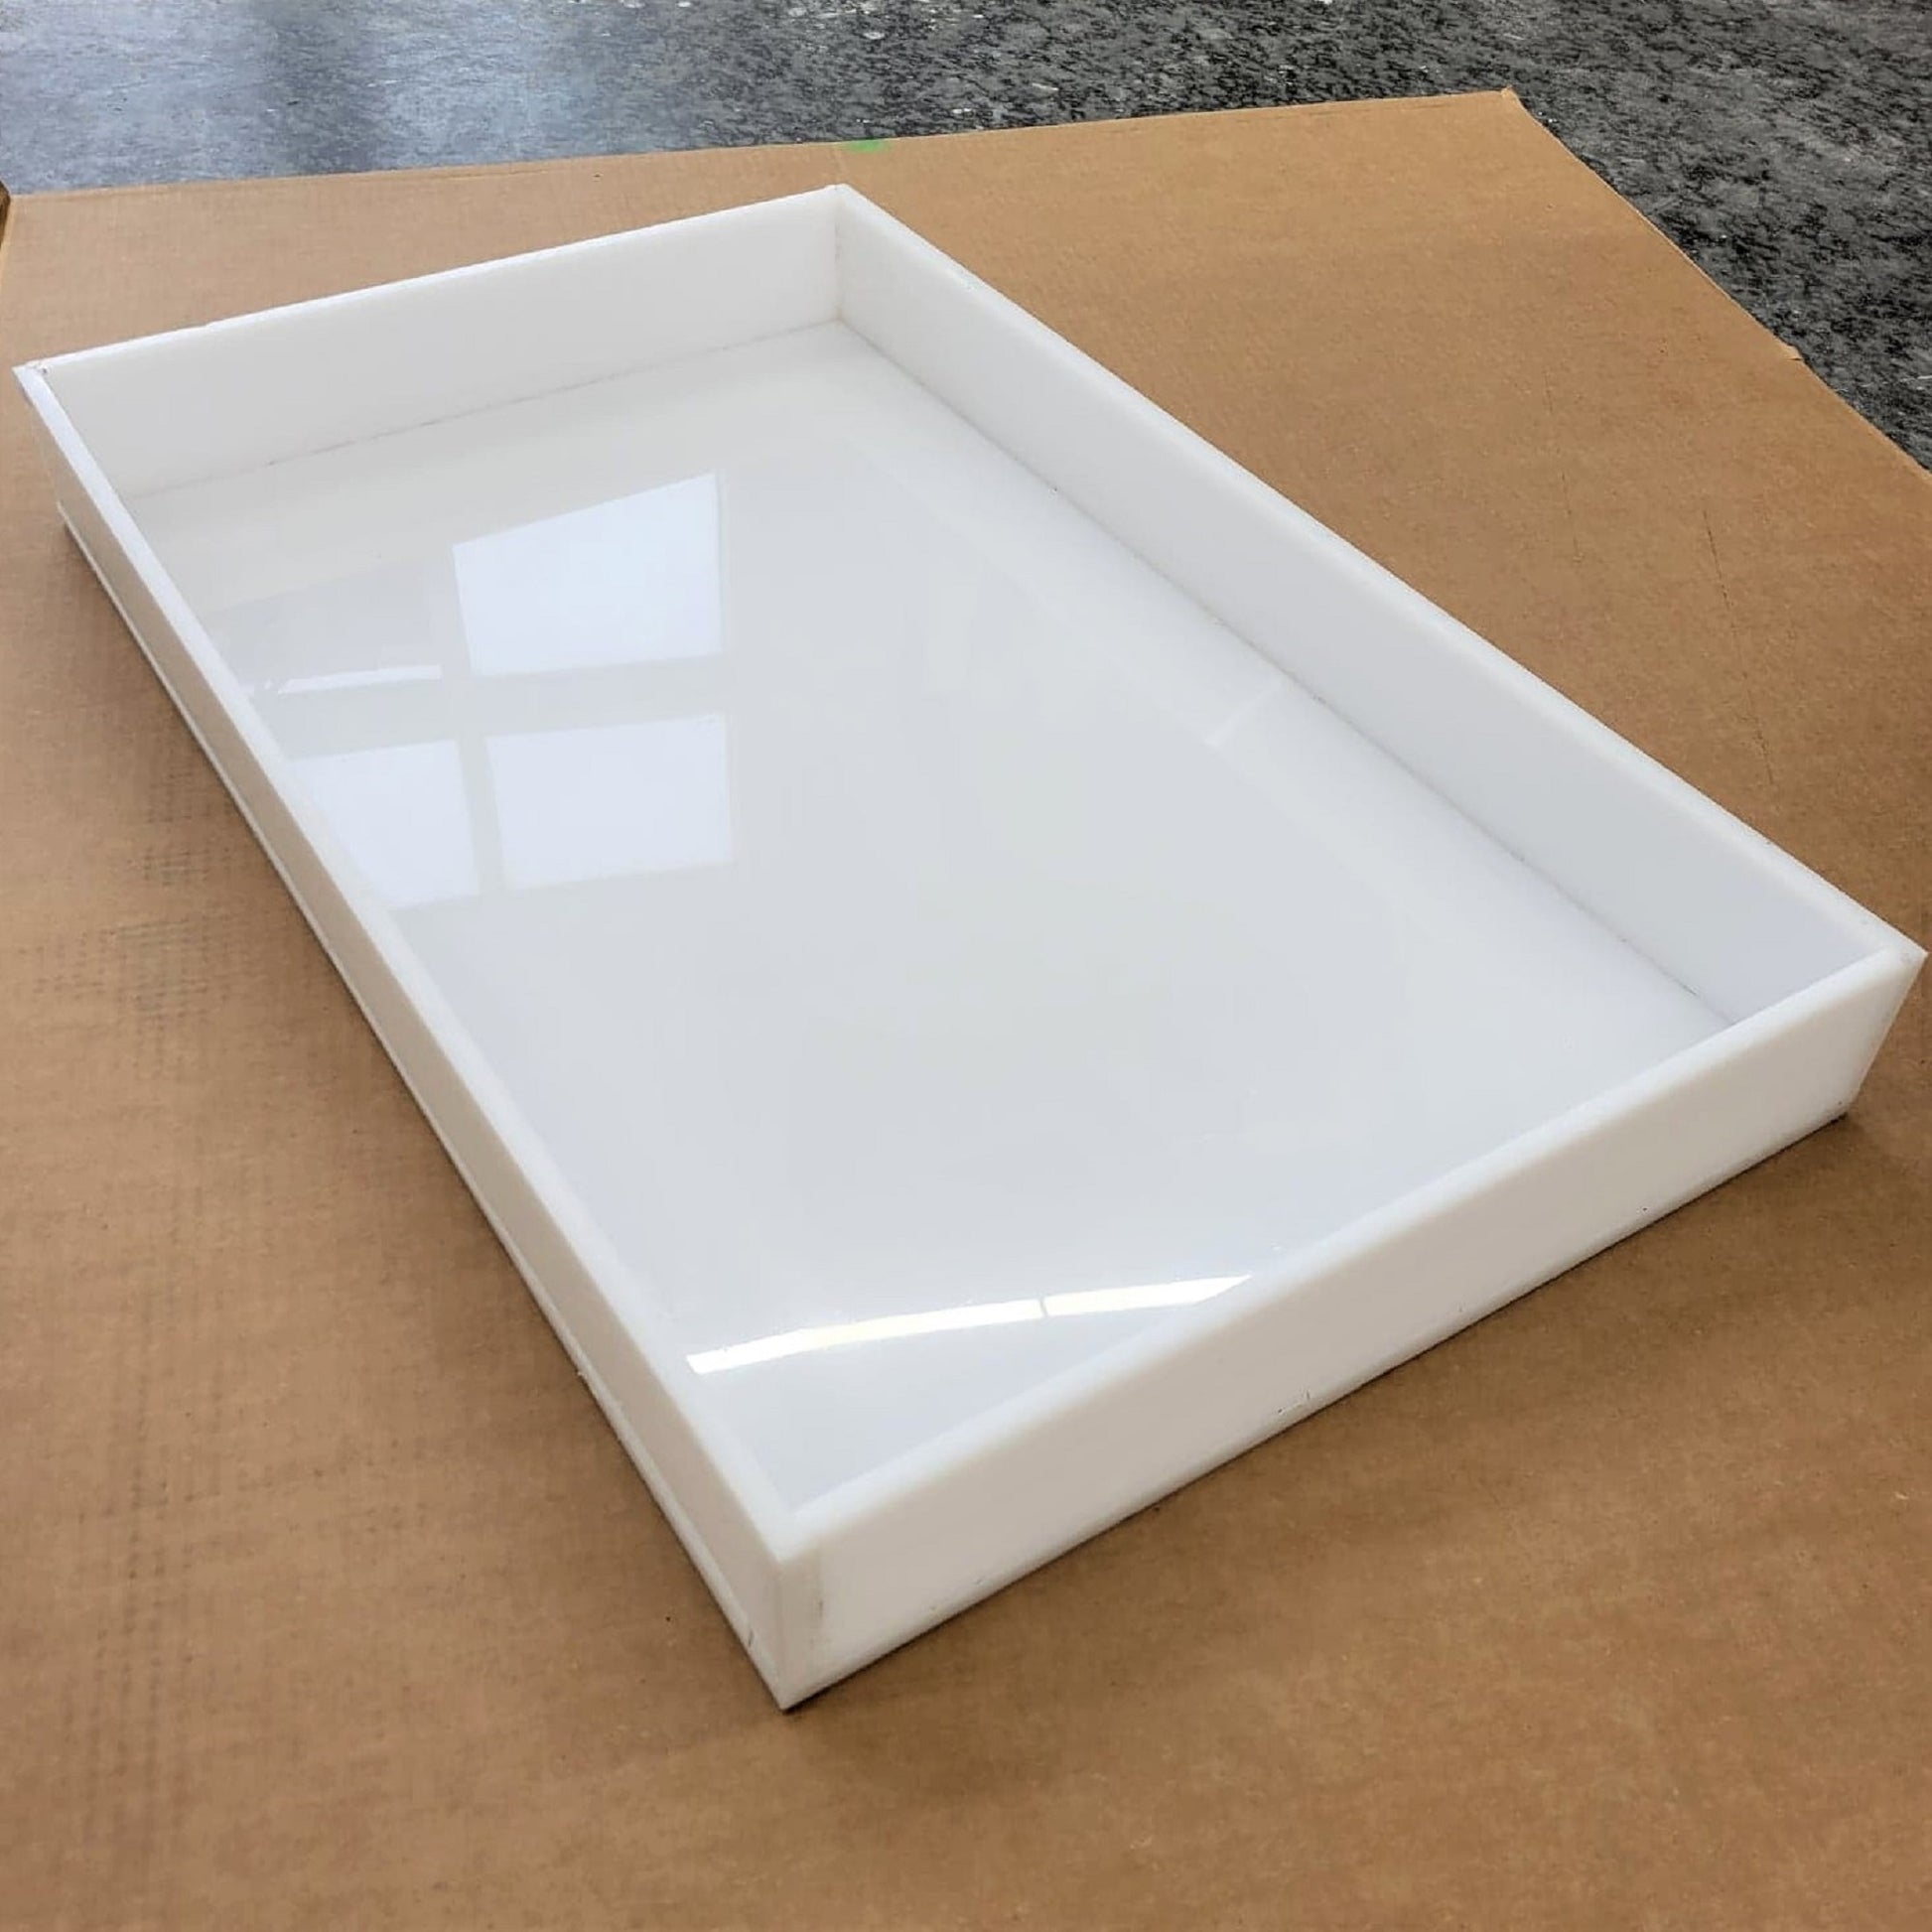 HDPE Molds, HDPE Forms, Silicon Mold, Epoxy Resin Mold, Resin Mold, Epoxy Mold, Large Mold, Charcuterie Board Mold, Silicone Forms, Resin Forms, Epoxy Forms, Epoxy Resin Forms, Crafted Elements